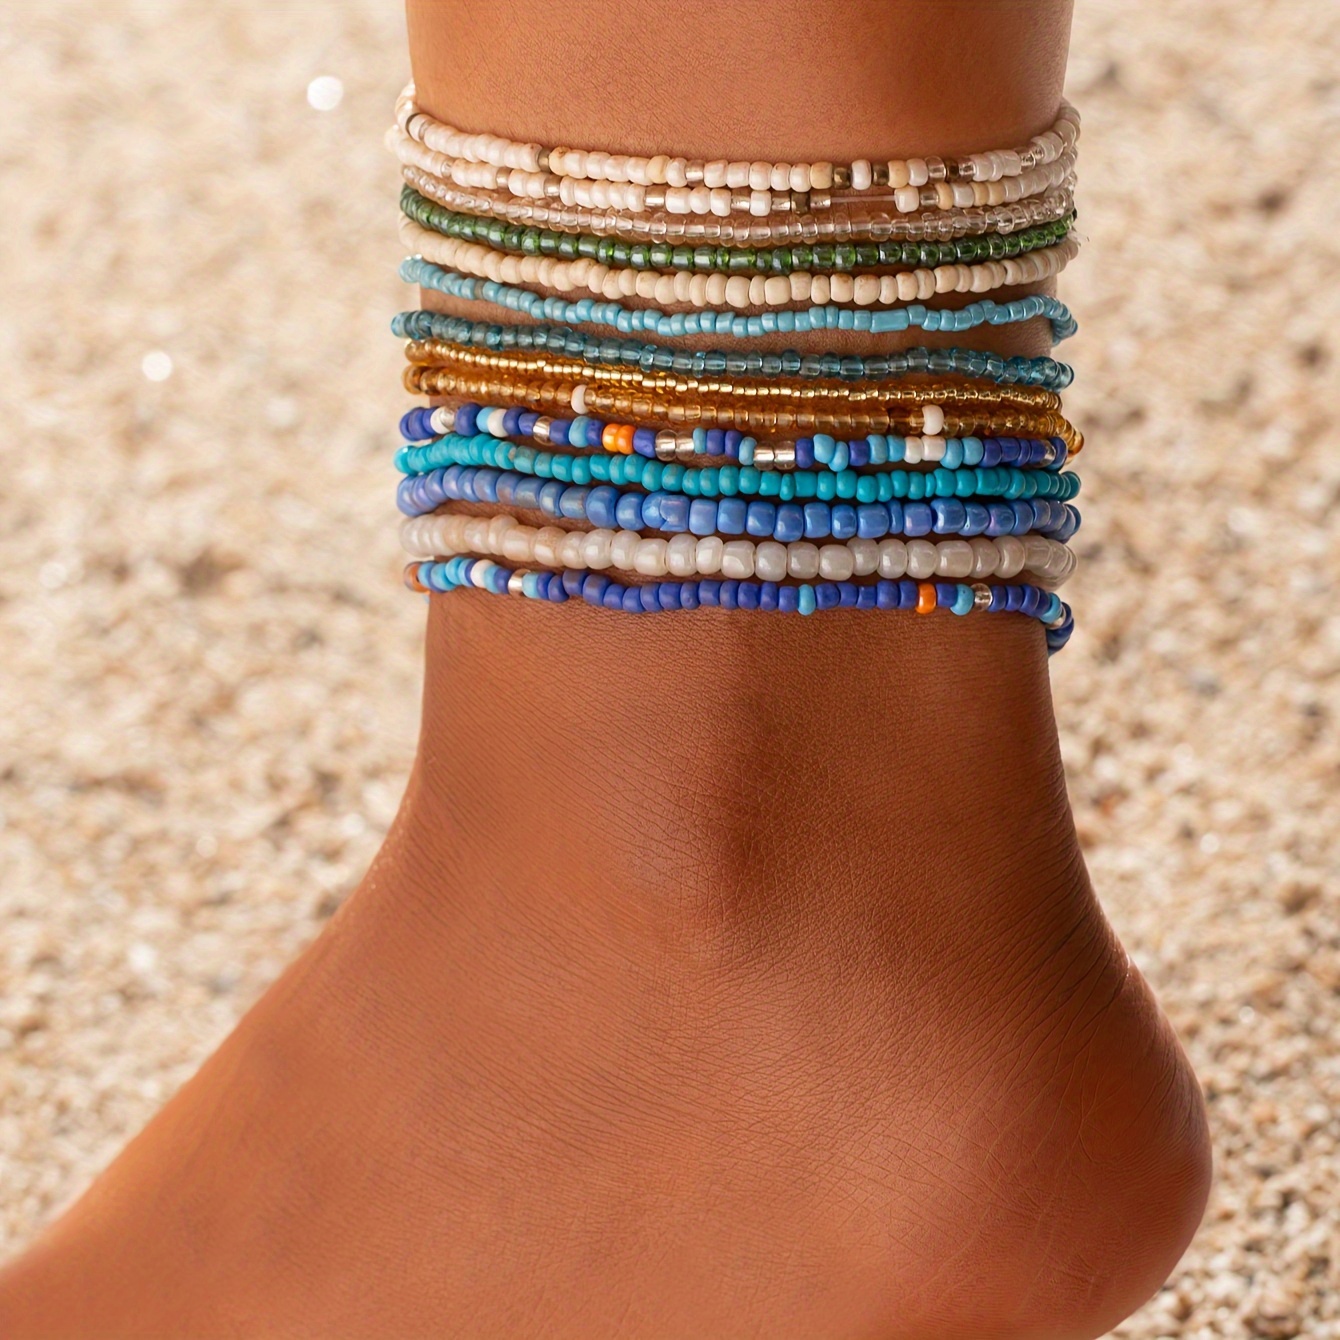 

14pcs, Bohemian Style Ankle Chains For Women, Glass Seed Beads, Summer Ocean Beach Vibes, Multicolor, Vacation Fashion Jewelry Accessories